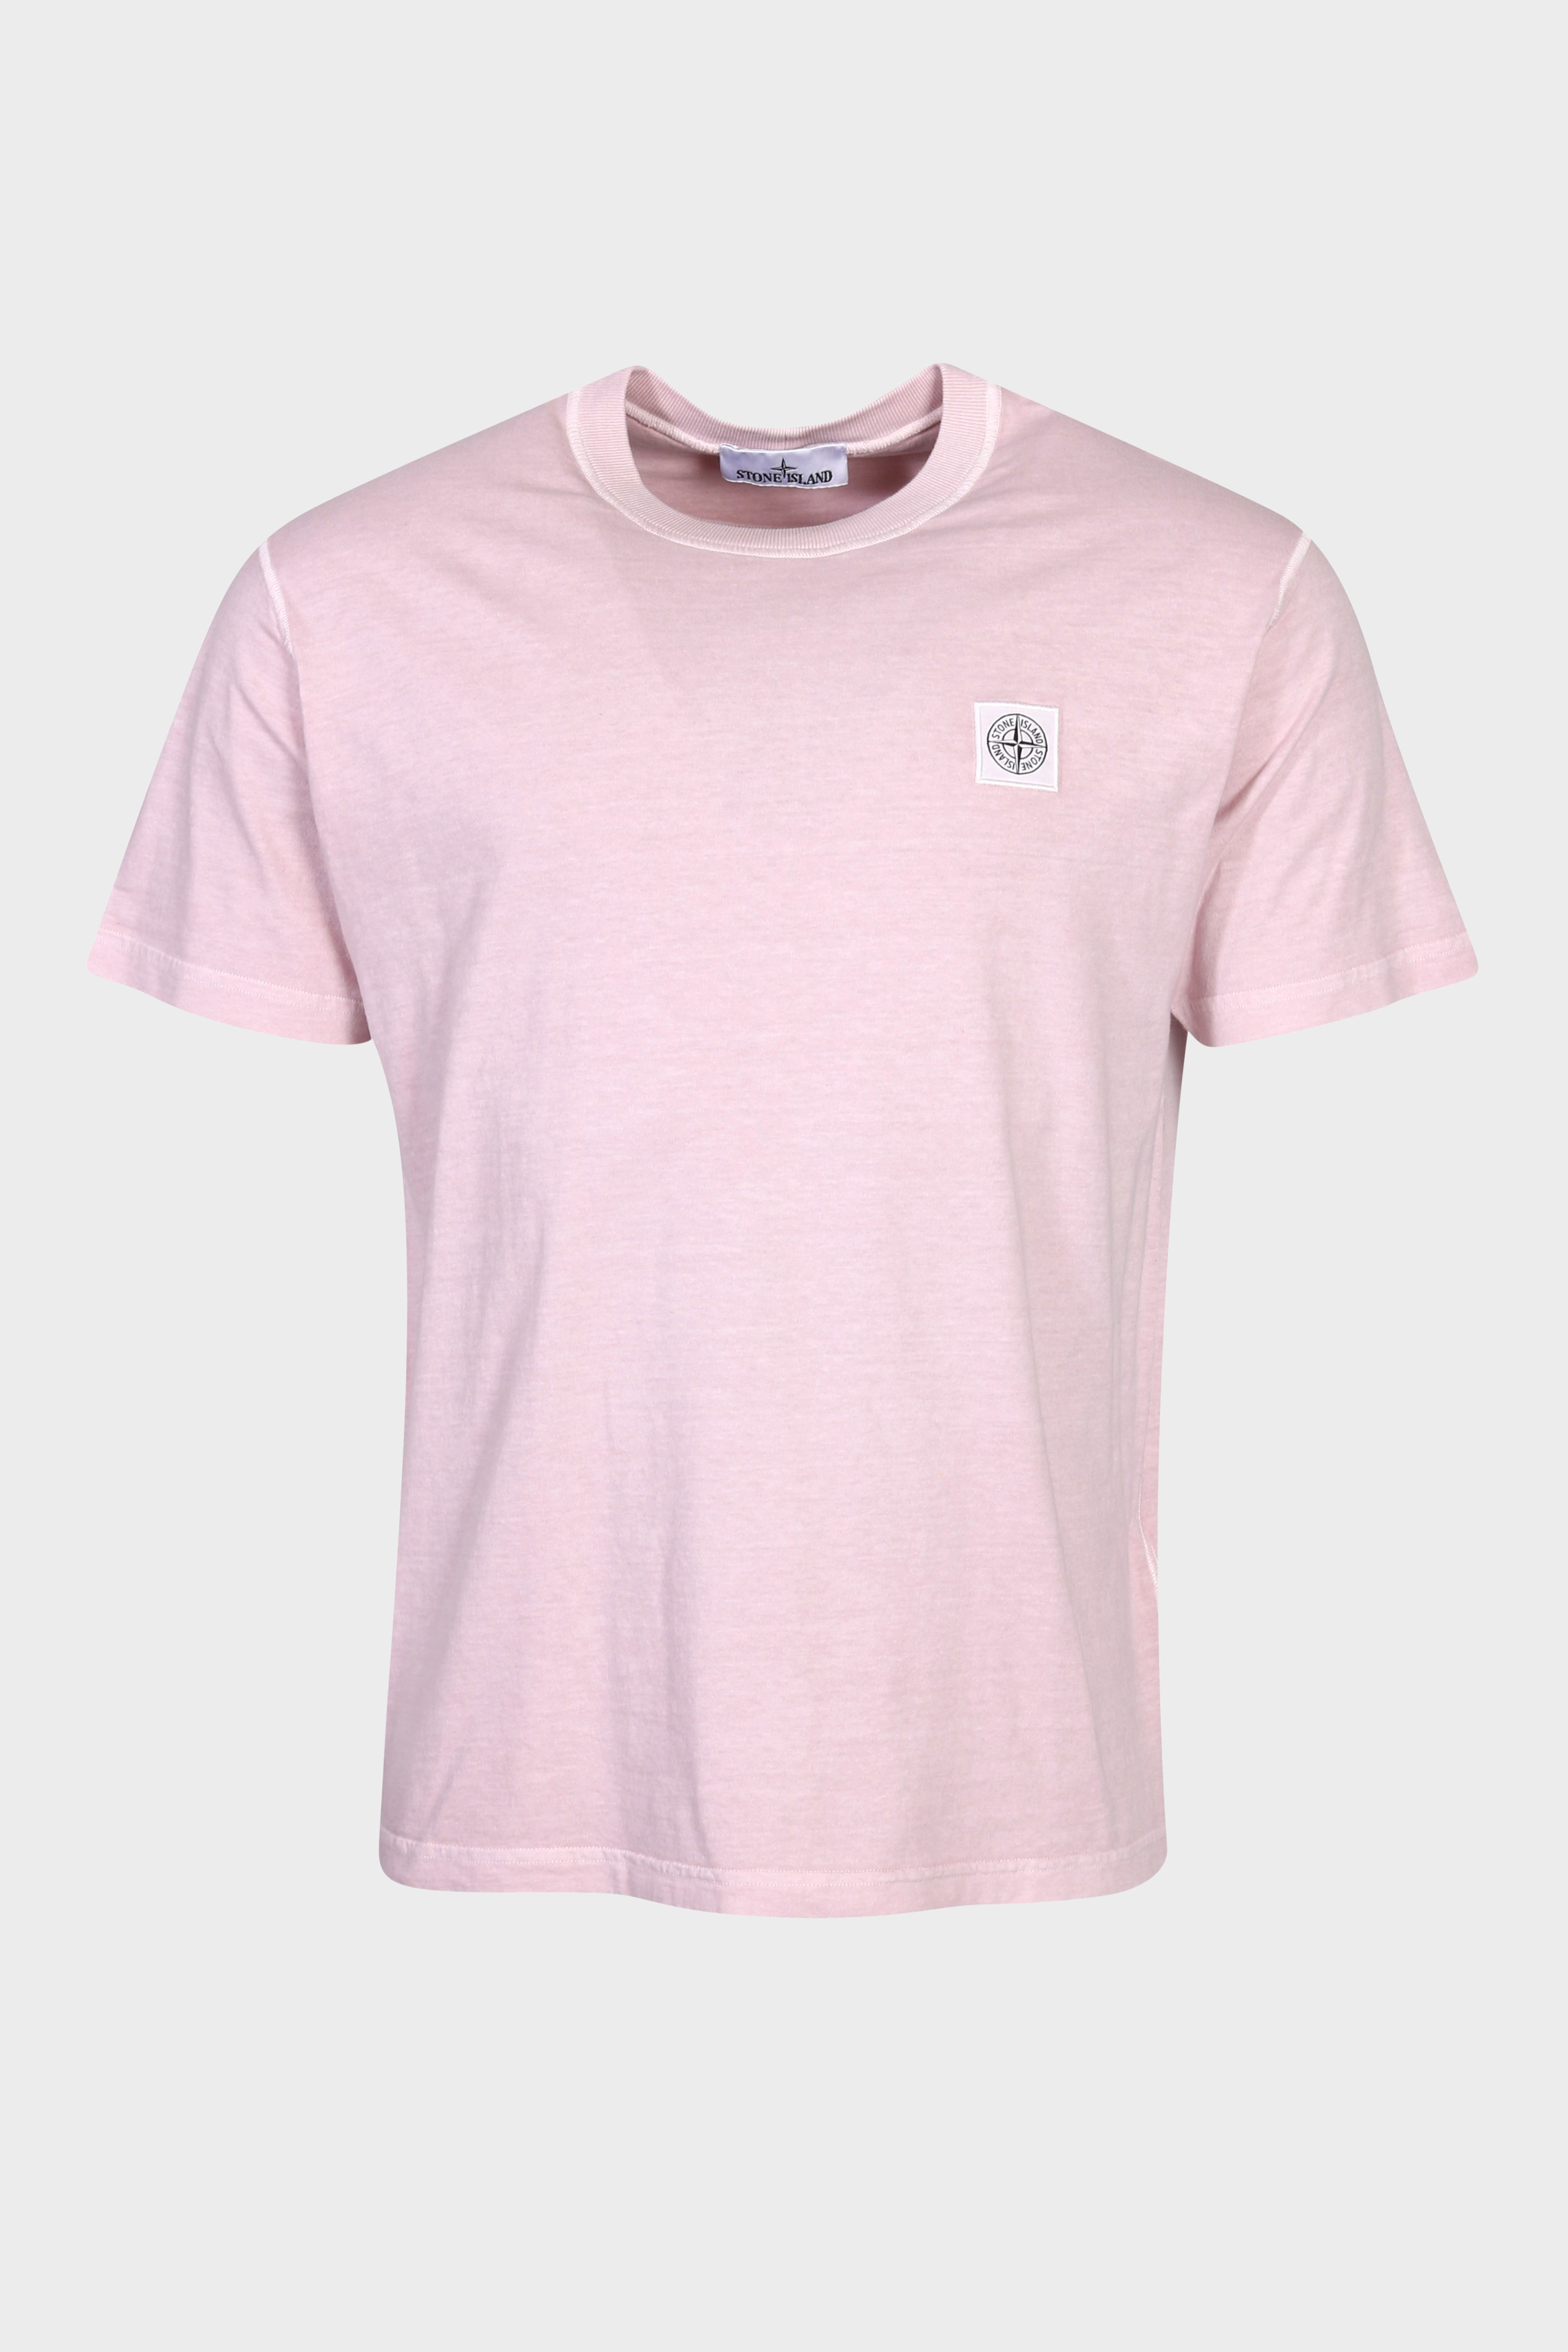 STONE ISLAND T-Shirt in Washed Light Pink